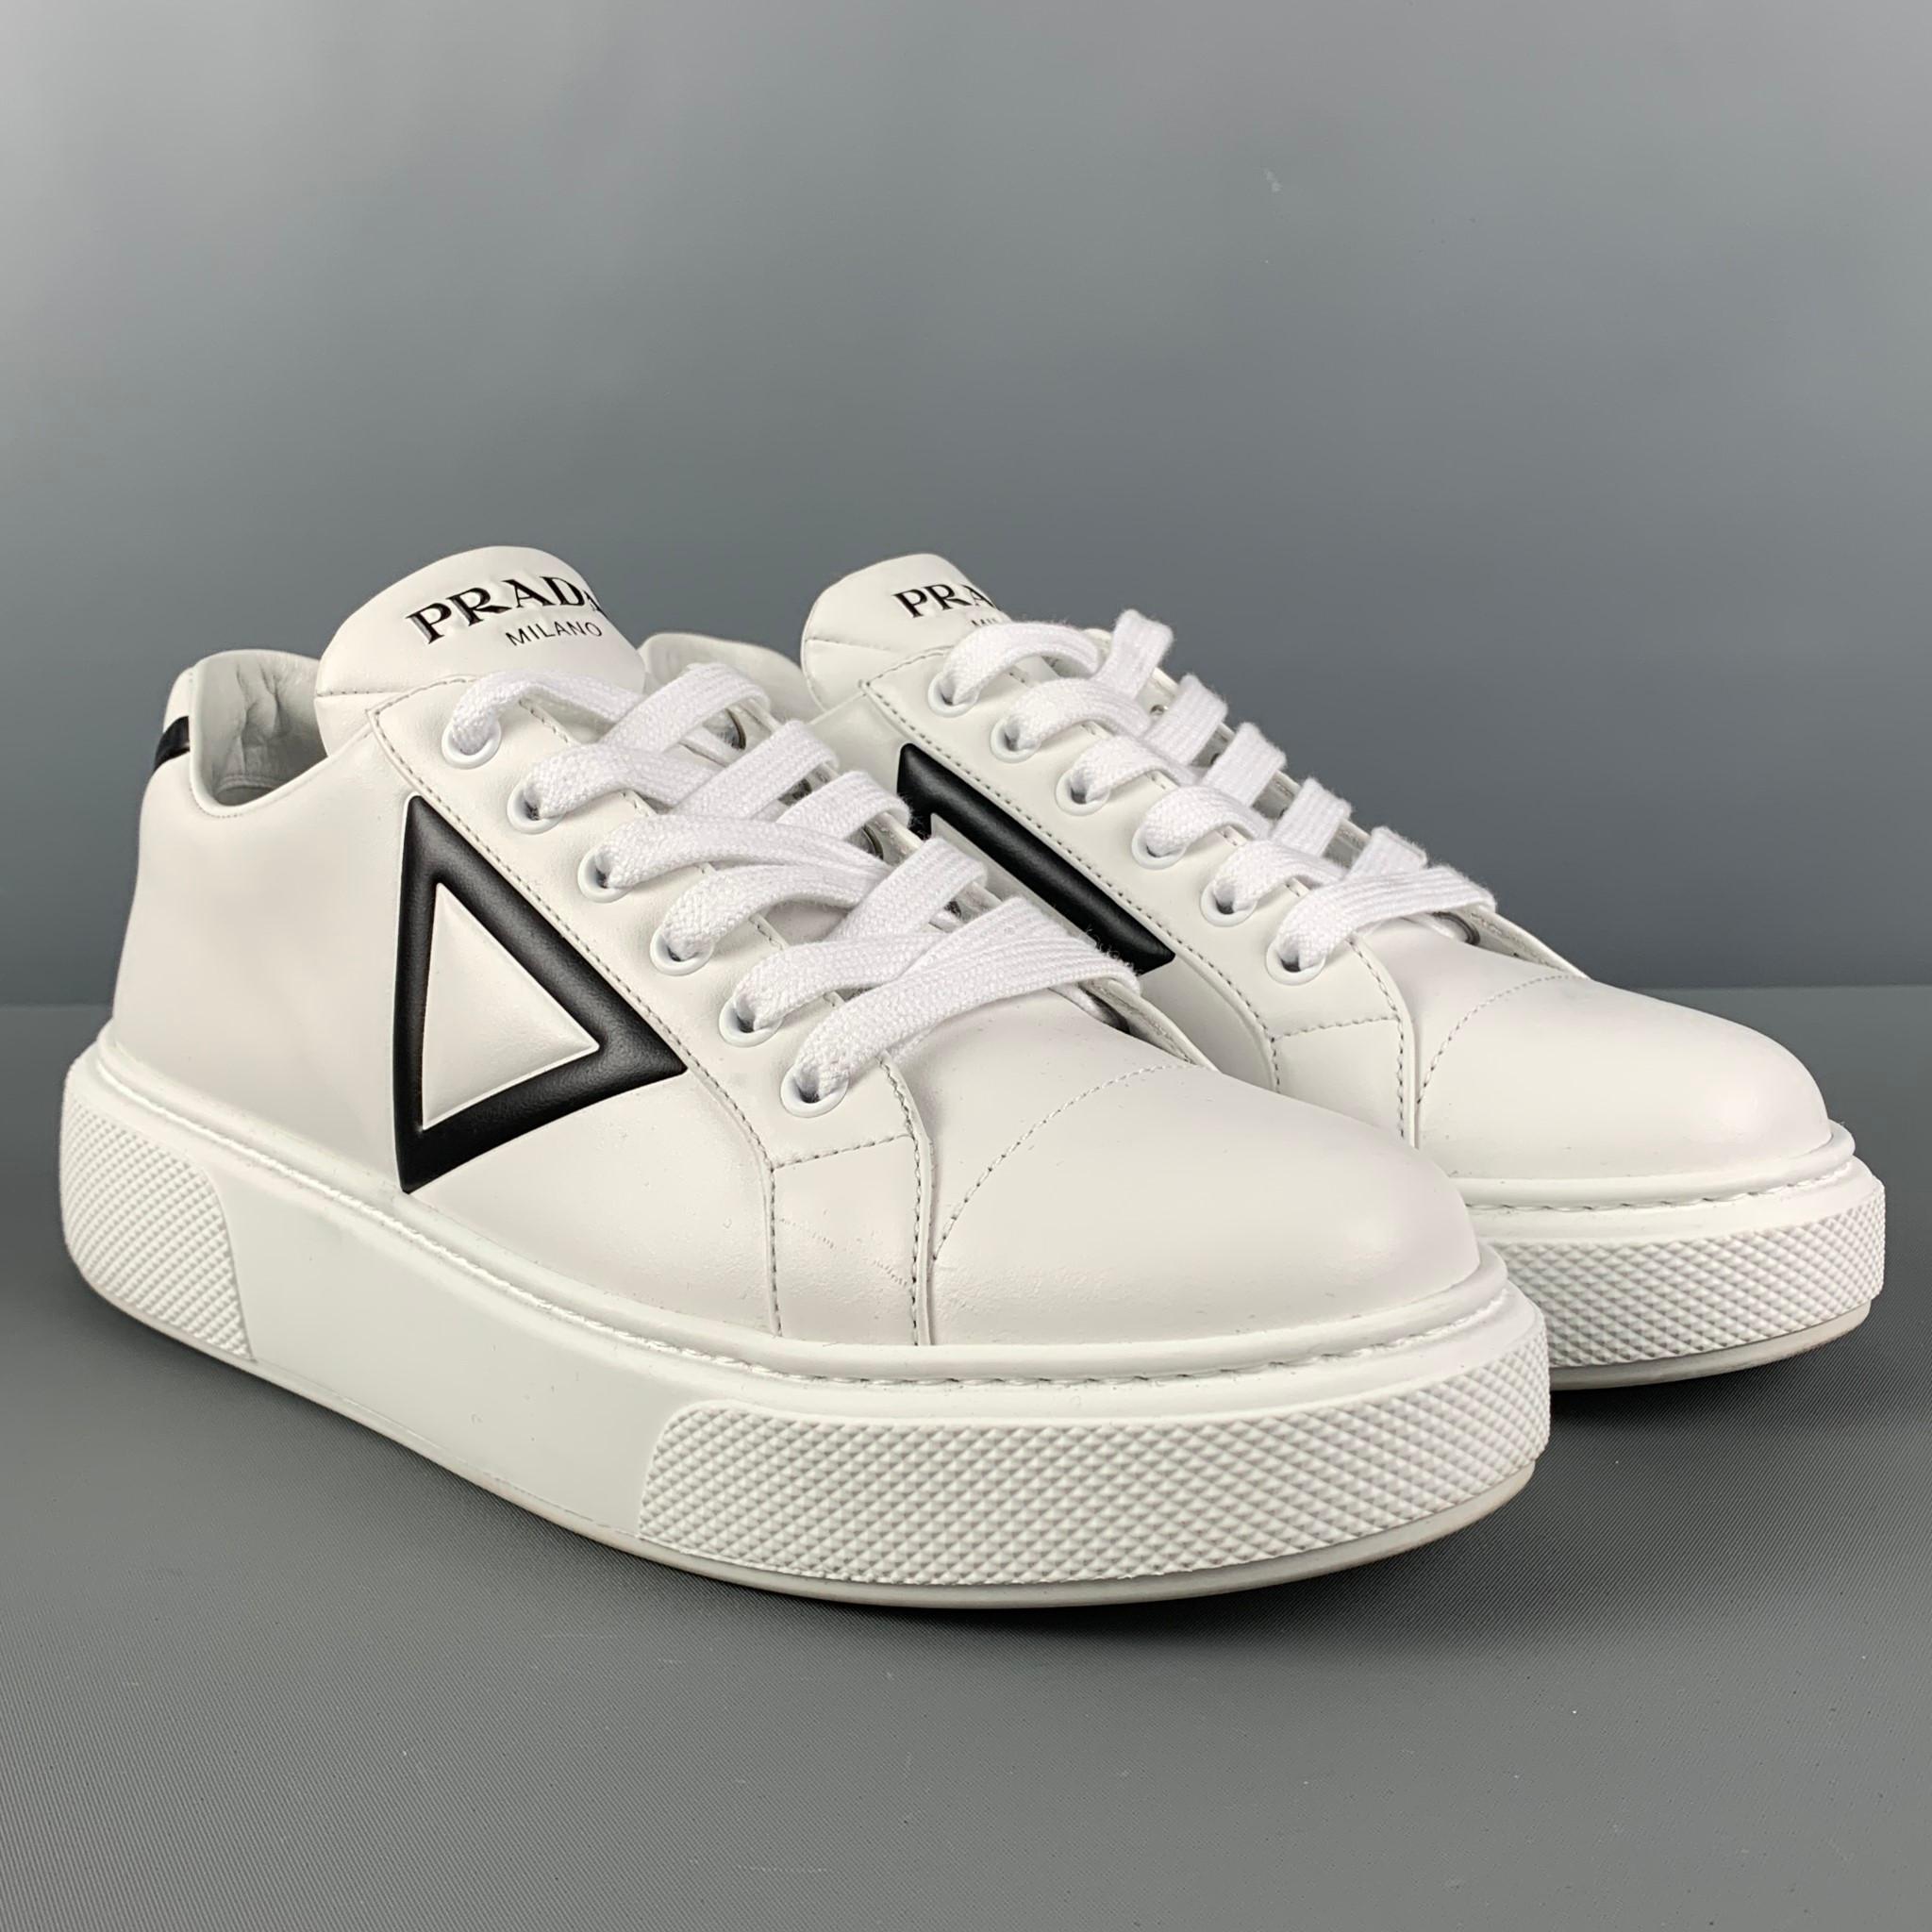 PRADA sneakers comes in a white leather with a black triangle design featuring a low-top style, chunky sole, and a lace up closure. Made in Italy. 

Excellent Pre-Owned Condition.
Marked: 633 37.5

Outsole: 10.75 in. x 4 in.